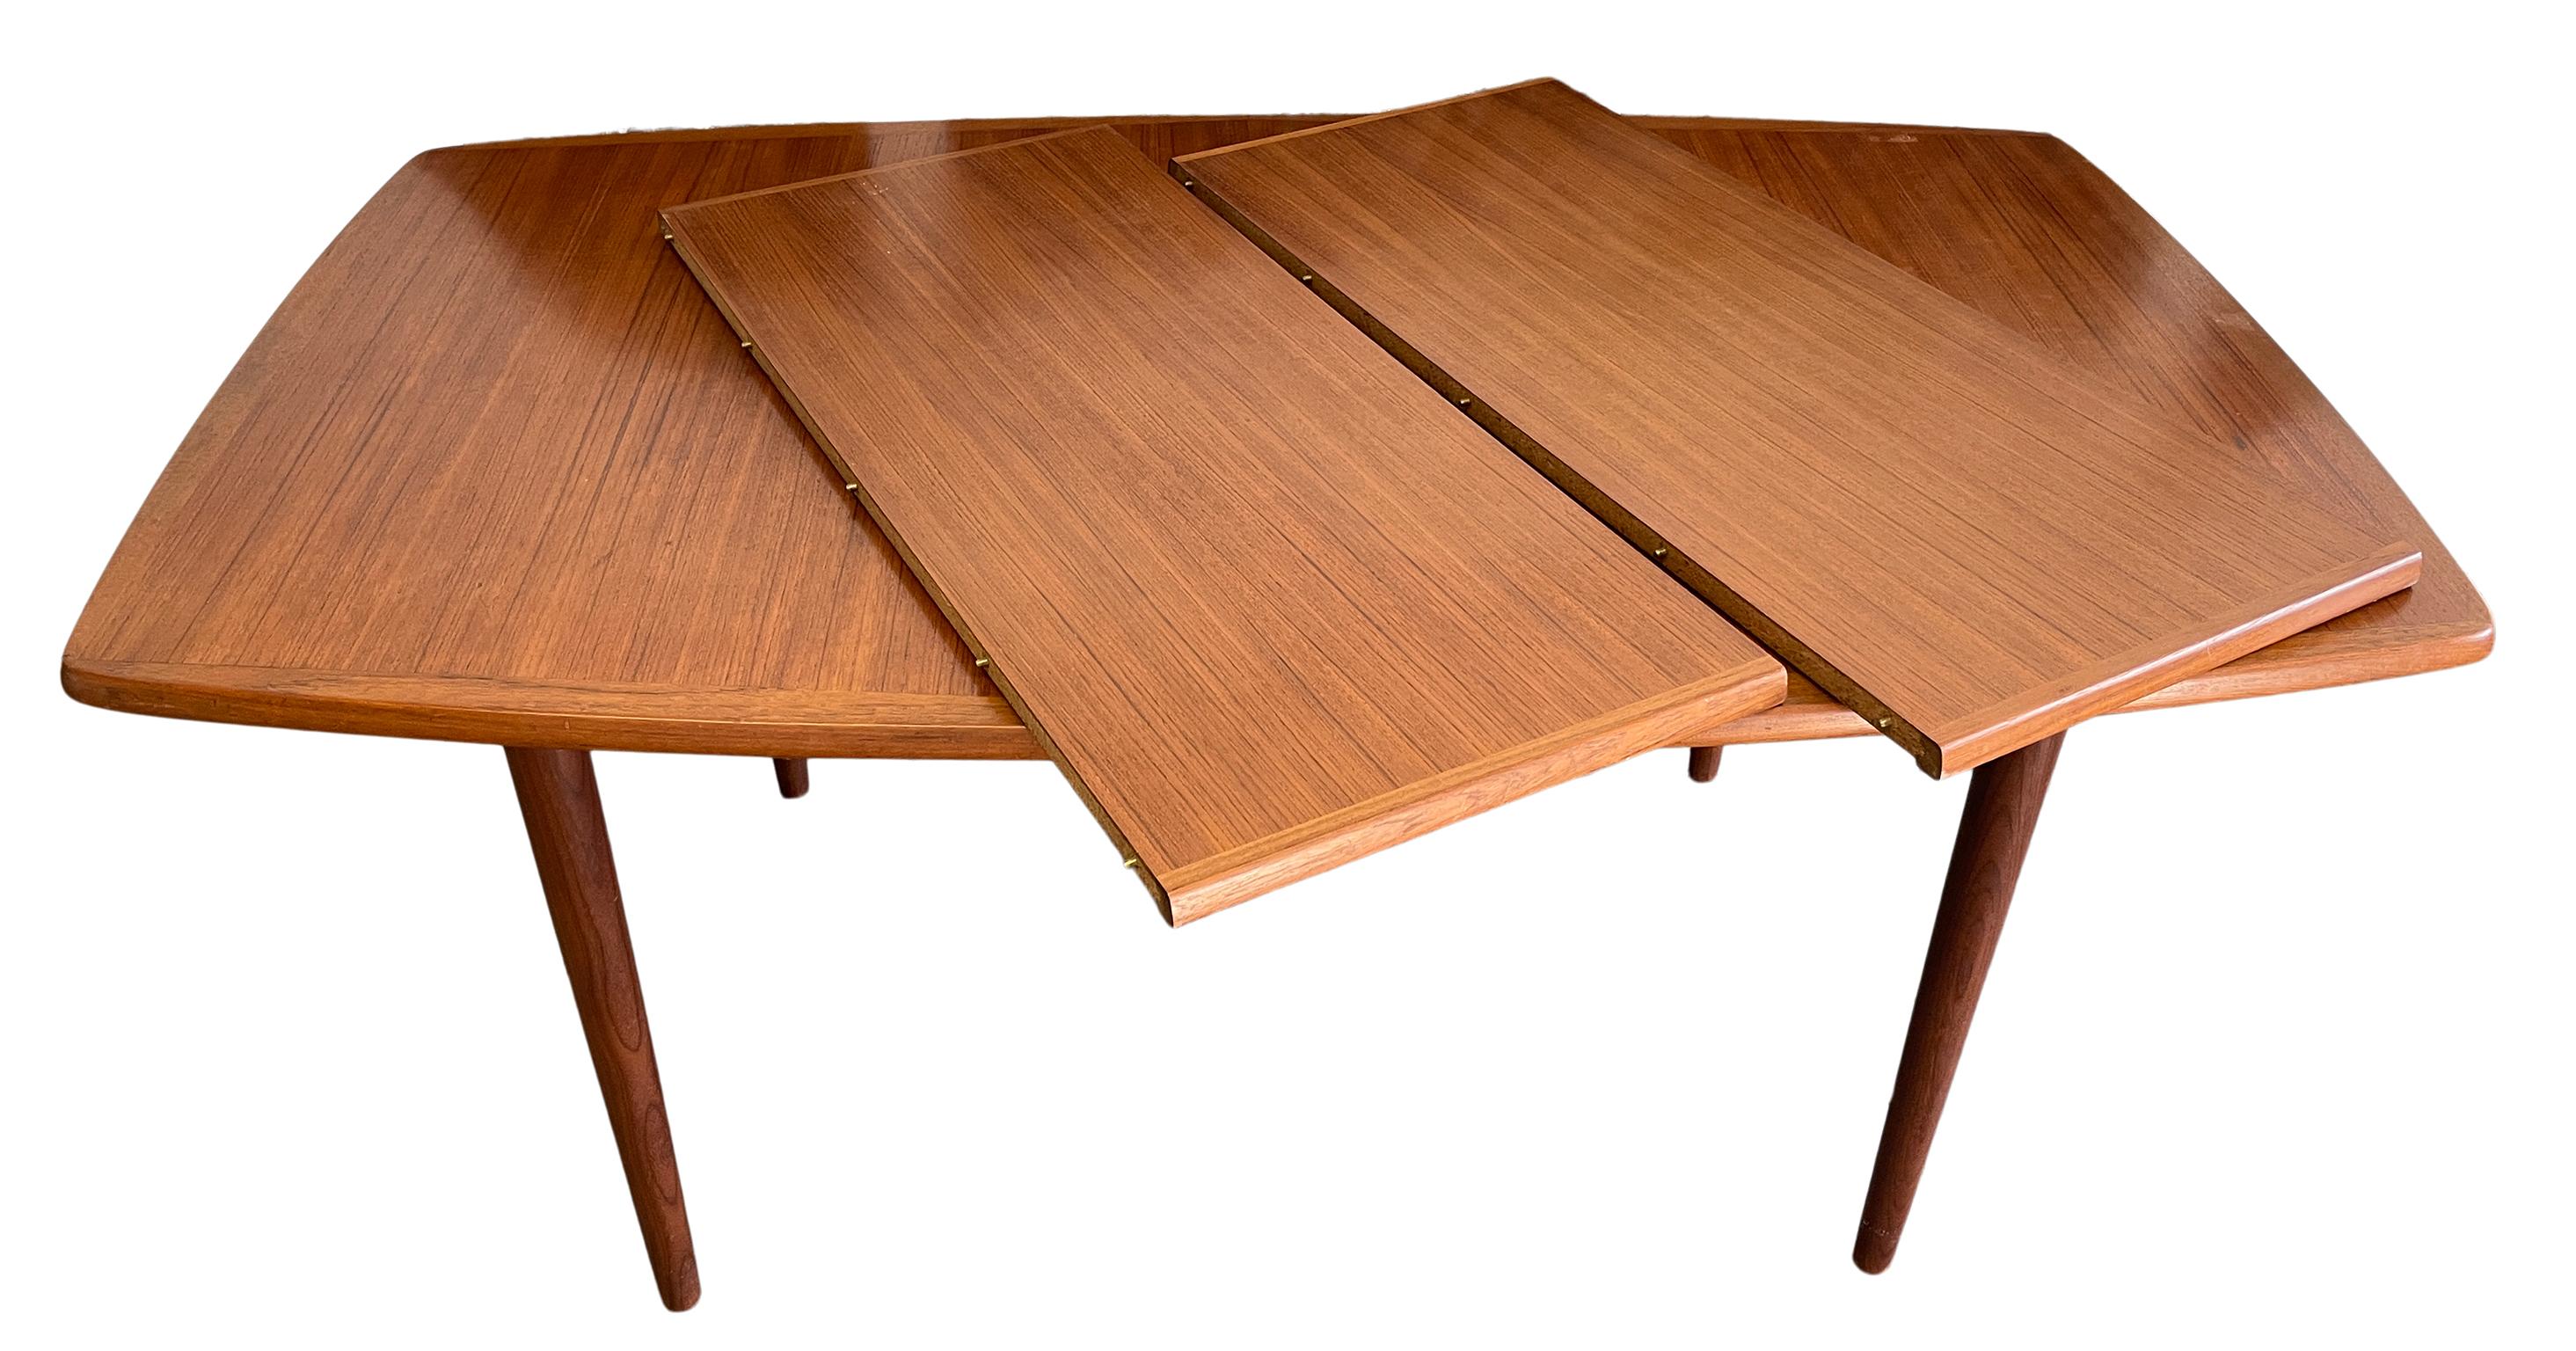 Woodwork Midcentury Elliptical rounded Teak Expandable Dining Table '2' Leaves Beautiful